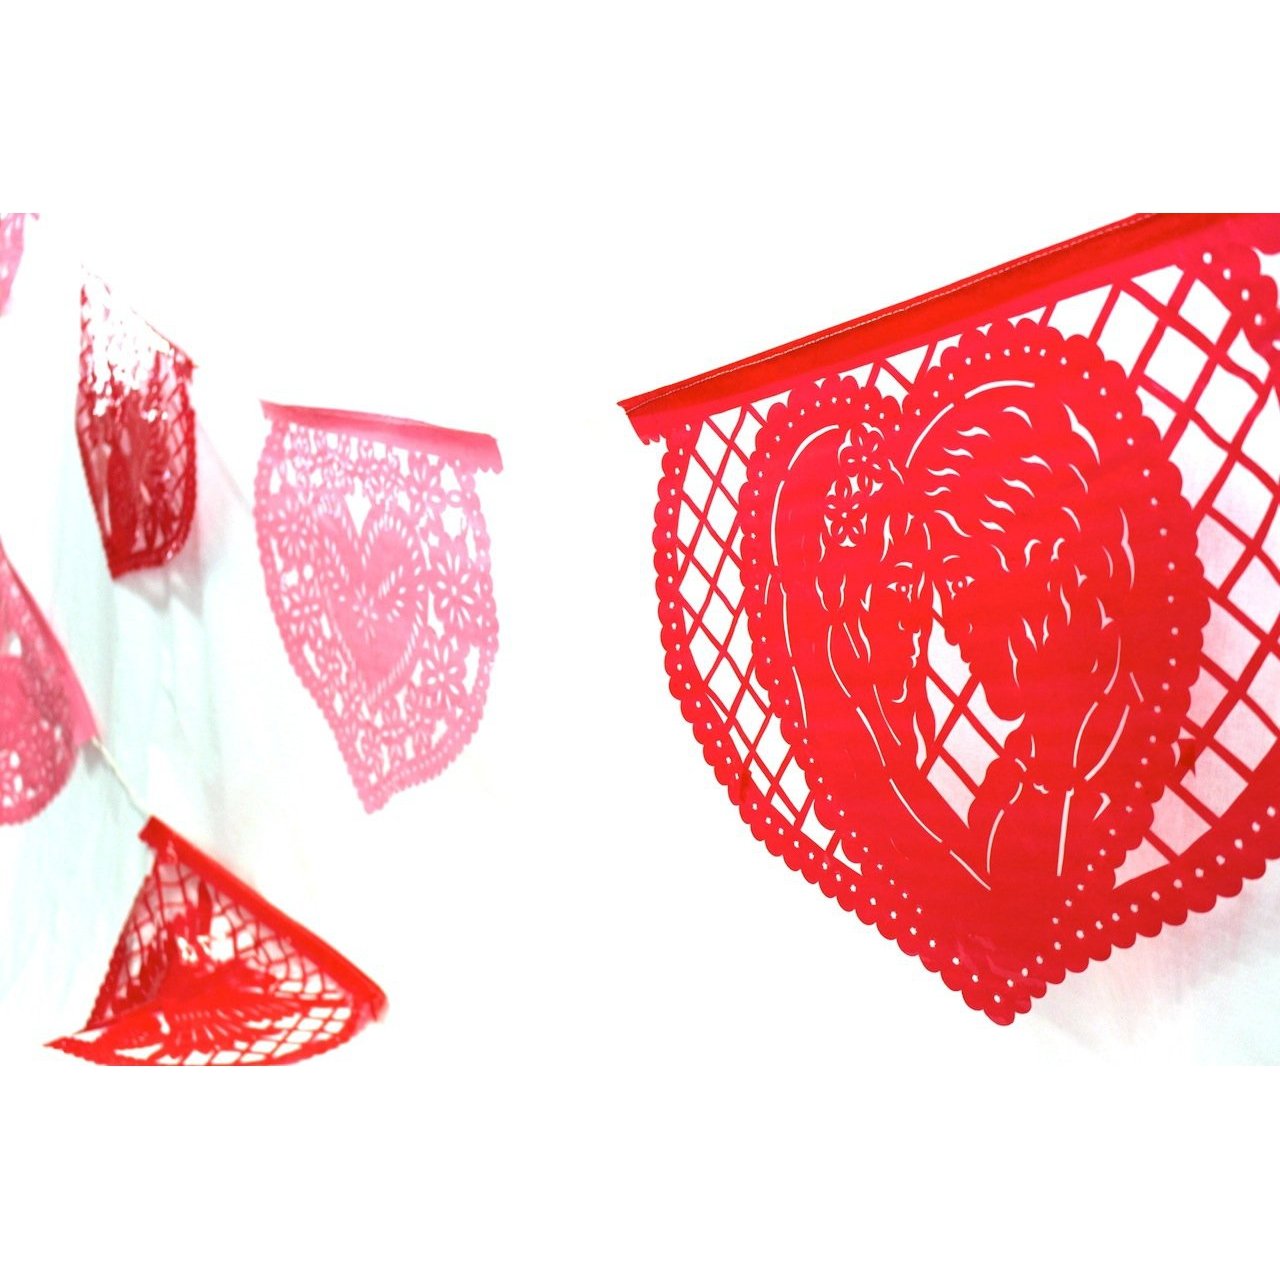 Mexican Bunting - Papel Picado Hearts Love (Red & Pink) - Colours of Mexico